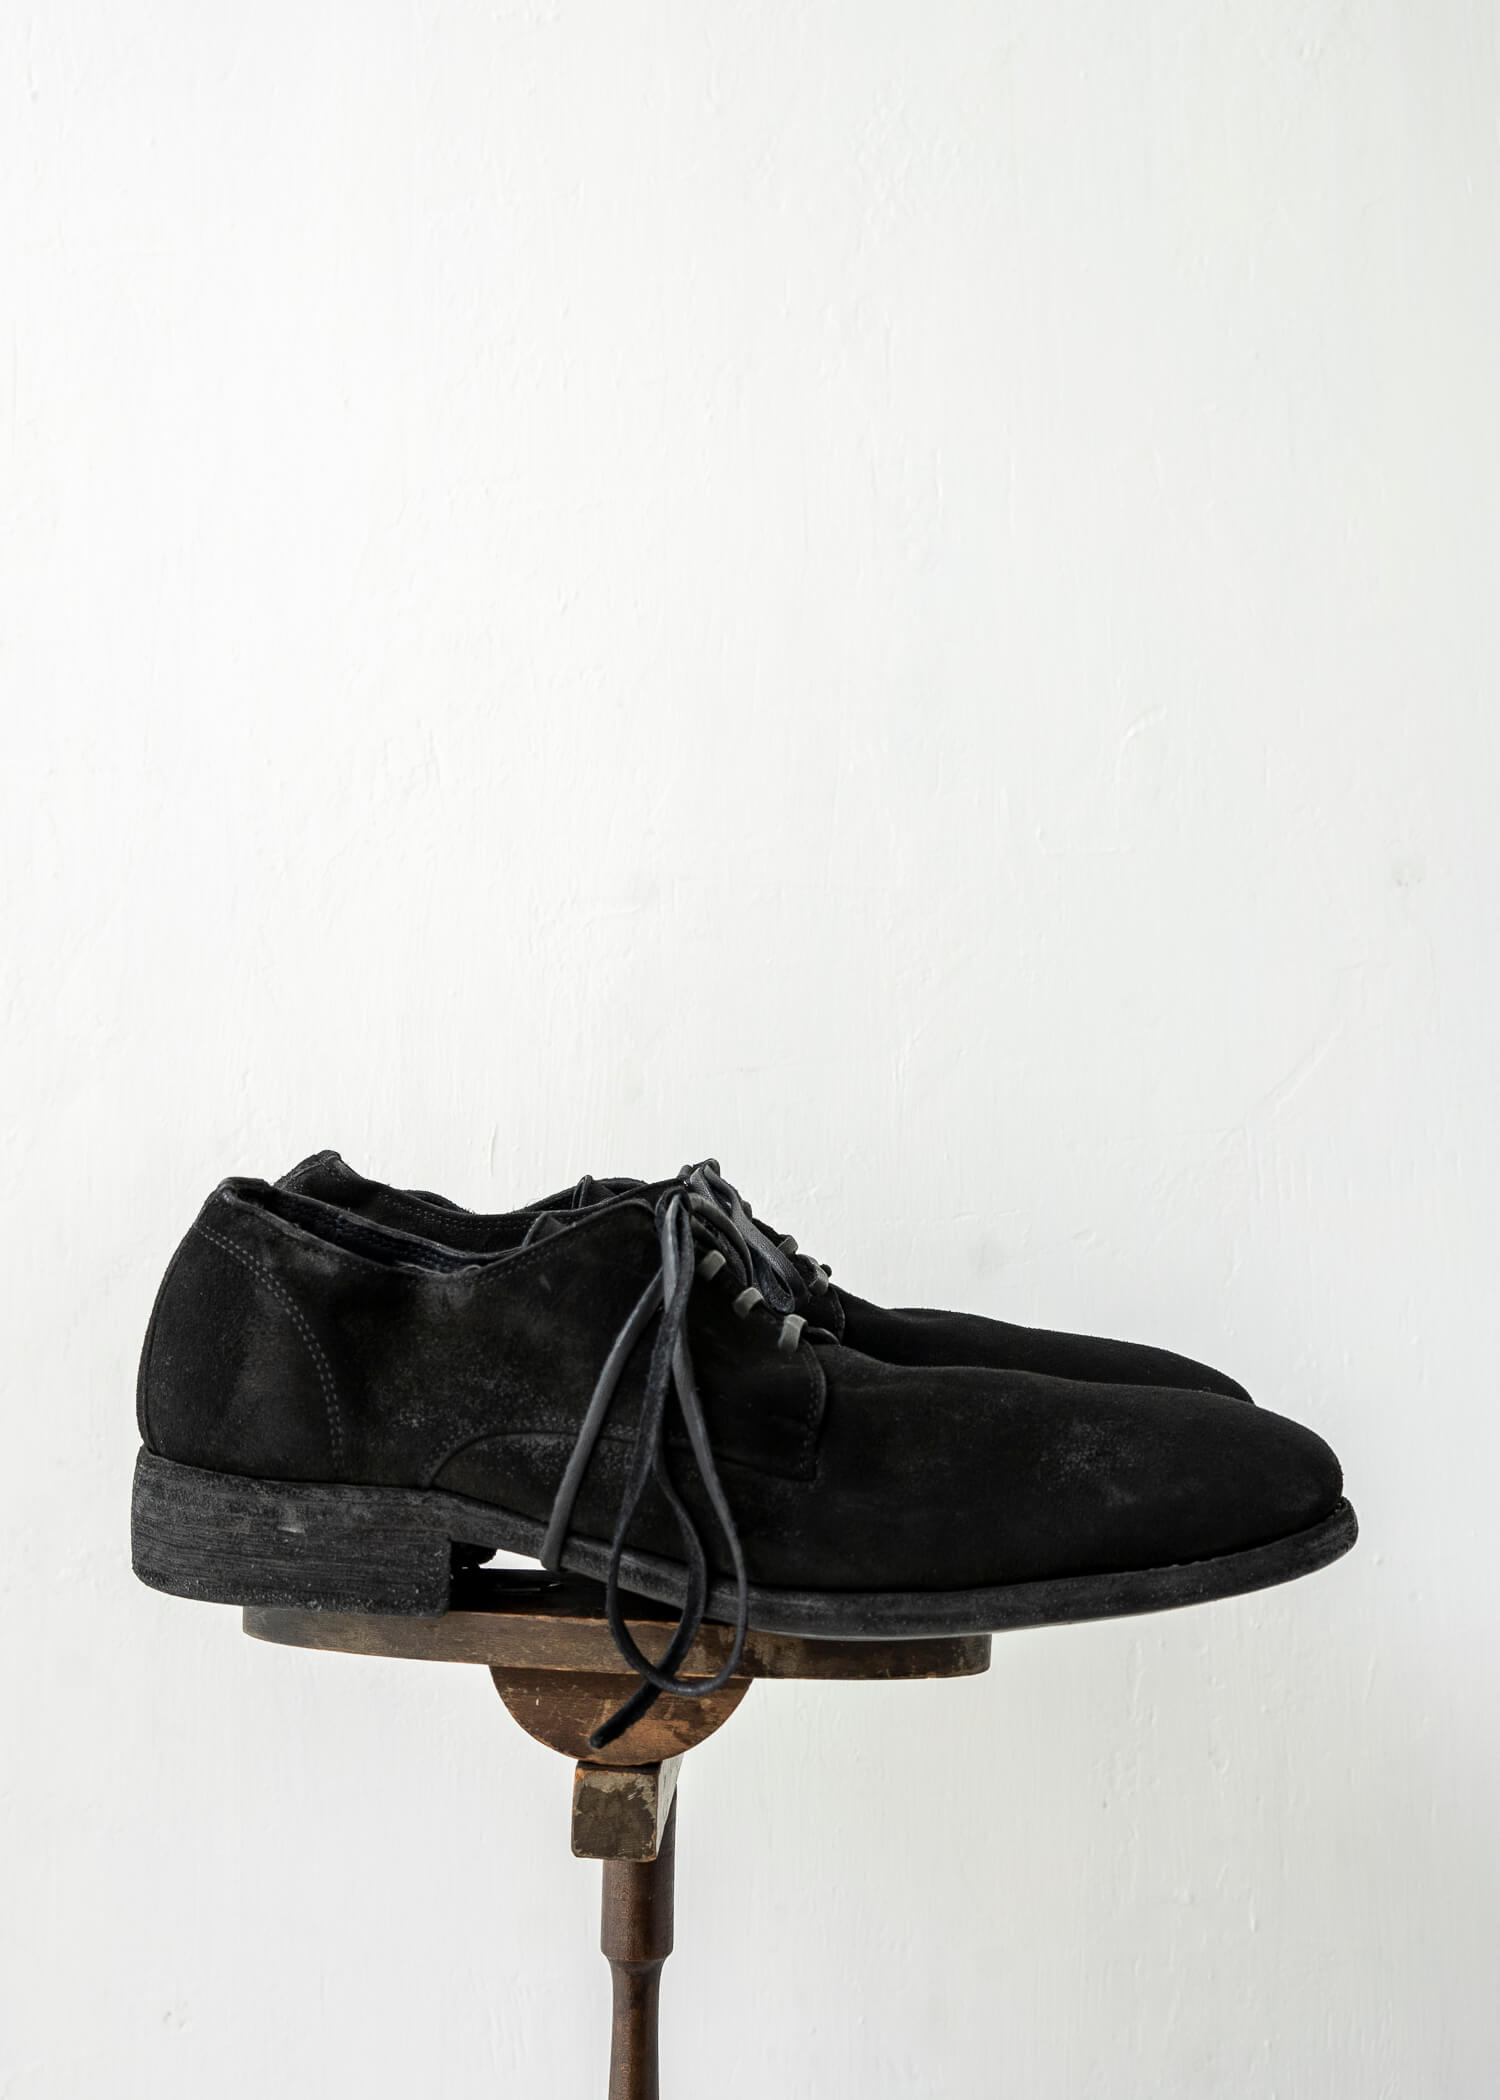 GUIDI "992X" CLASSIC DERBY / SOLE LEATHER / HORSE REVERSE / BLKT